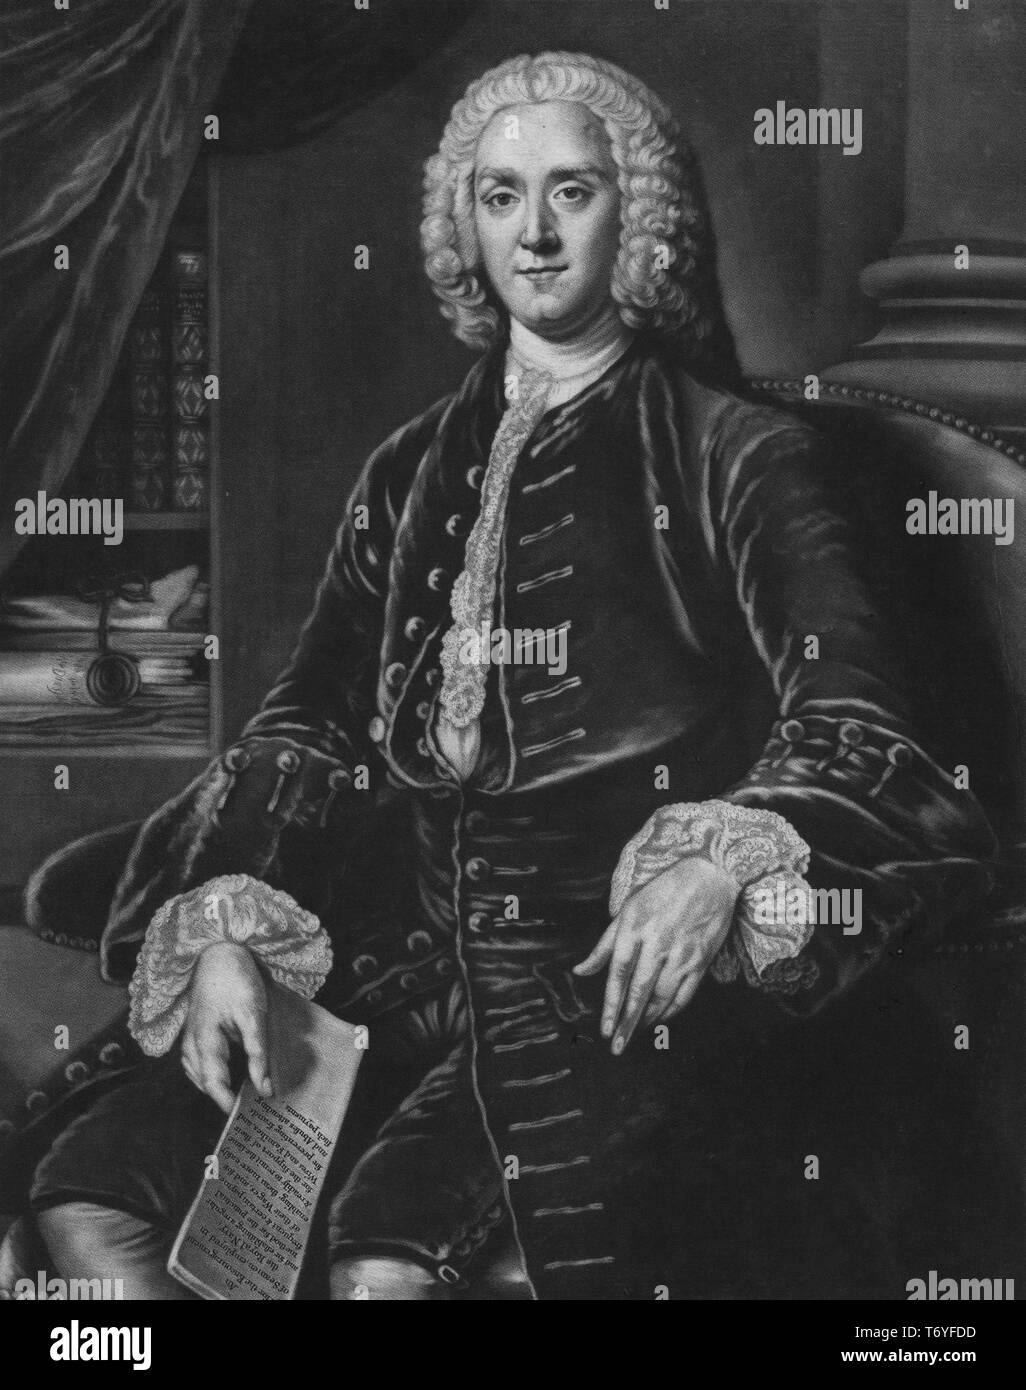 Engraved portrait of George Grenville, the first Lord Commissioner of the Admiralty and the Prime Minister of Great Britain, a British statesman from Wotton Underwood, Buckinghamshire, England, 1760. From the New York Public Library. () Stock Photo